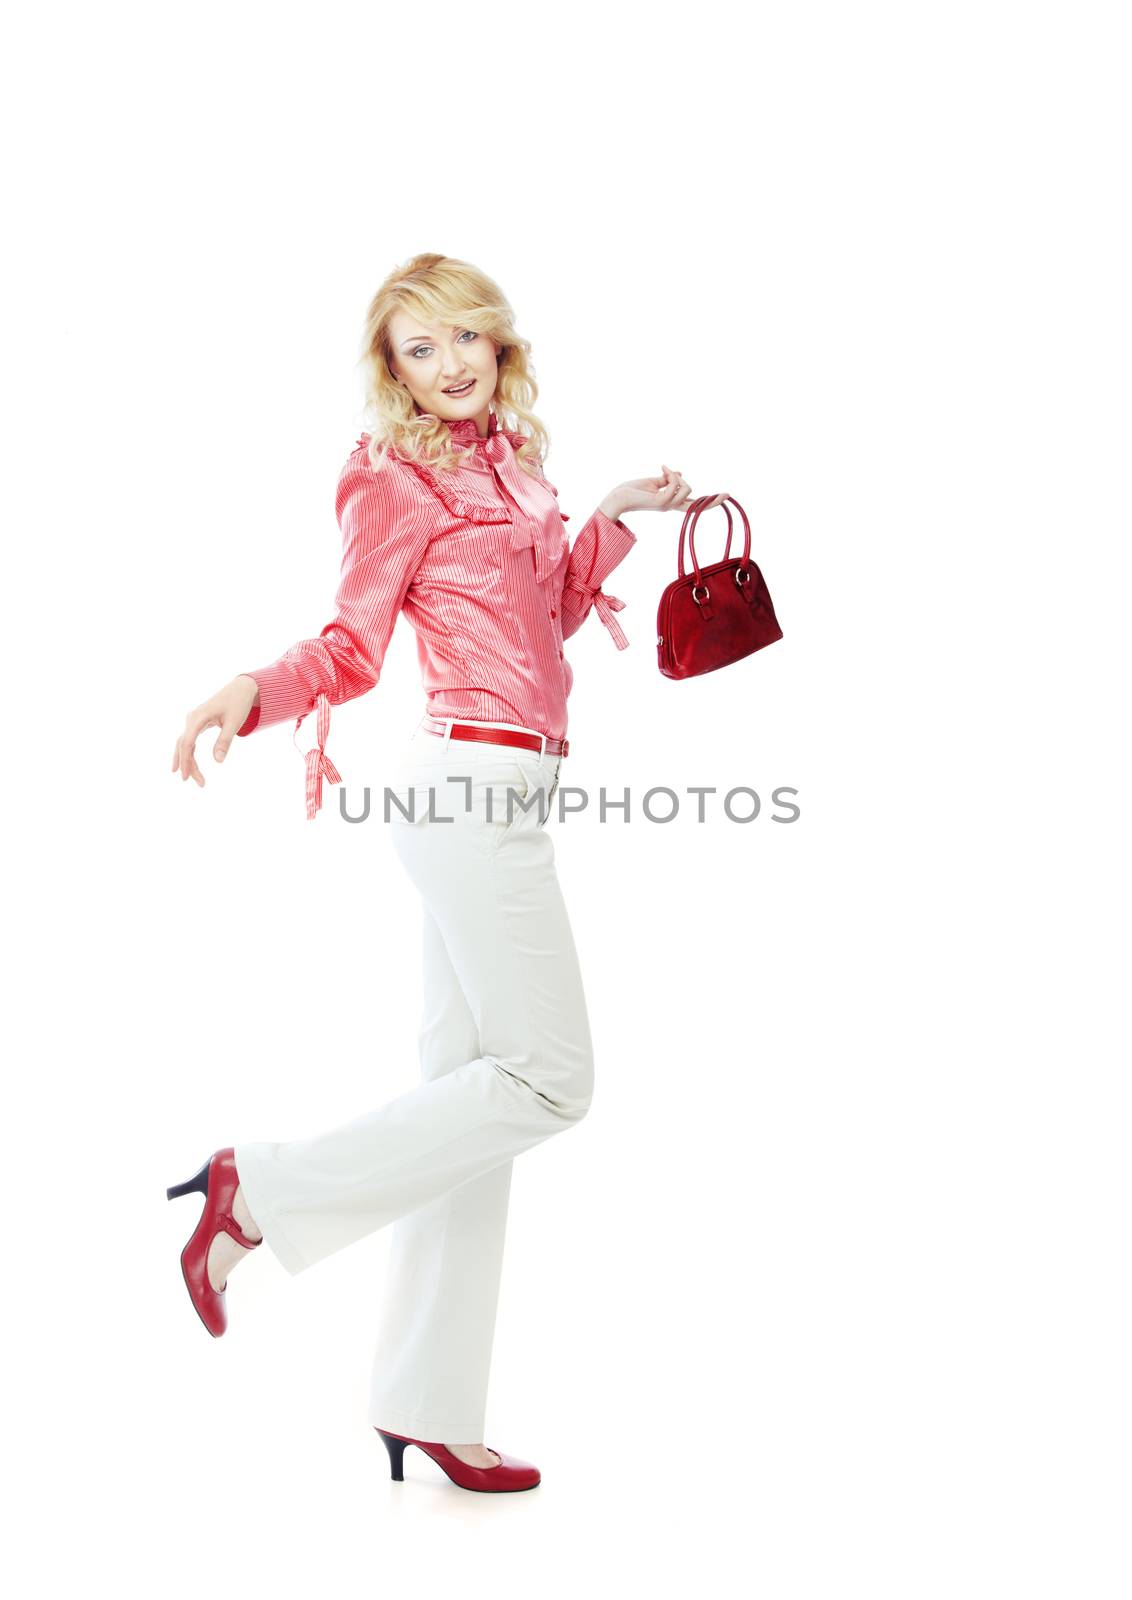 Fashionable lady in shirts and trousers holding red bag